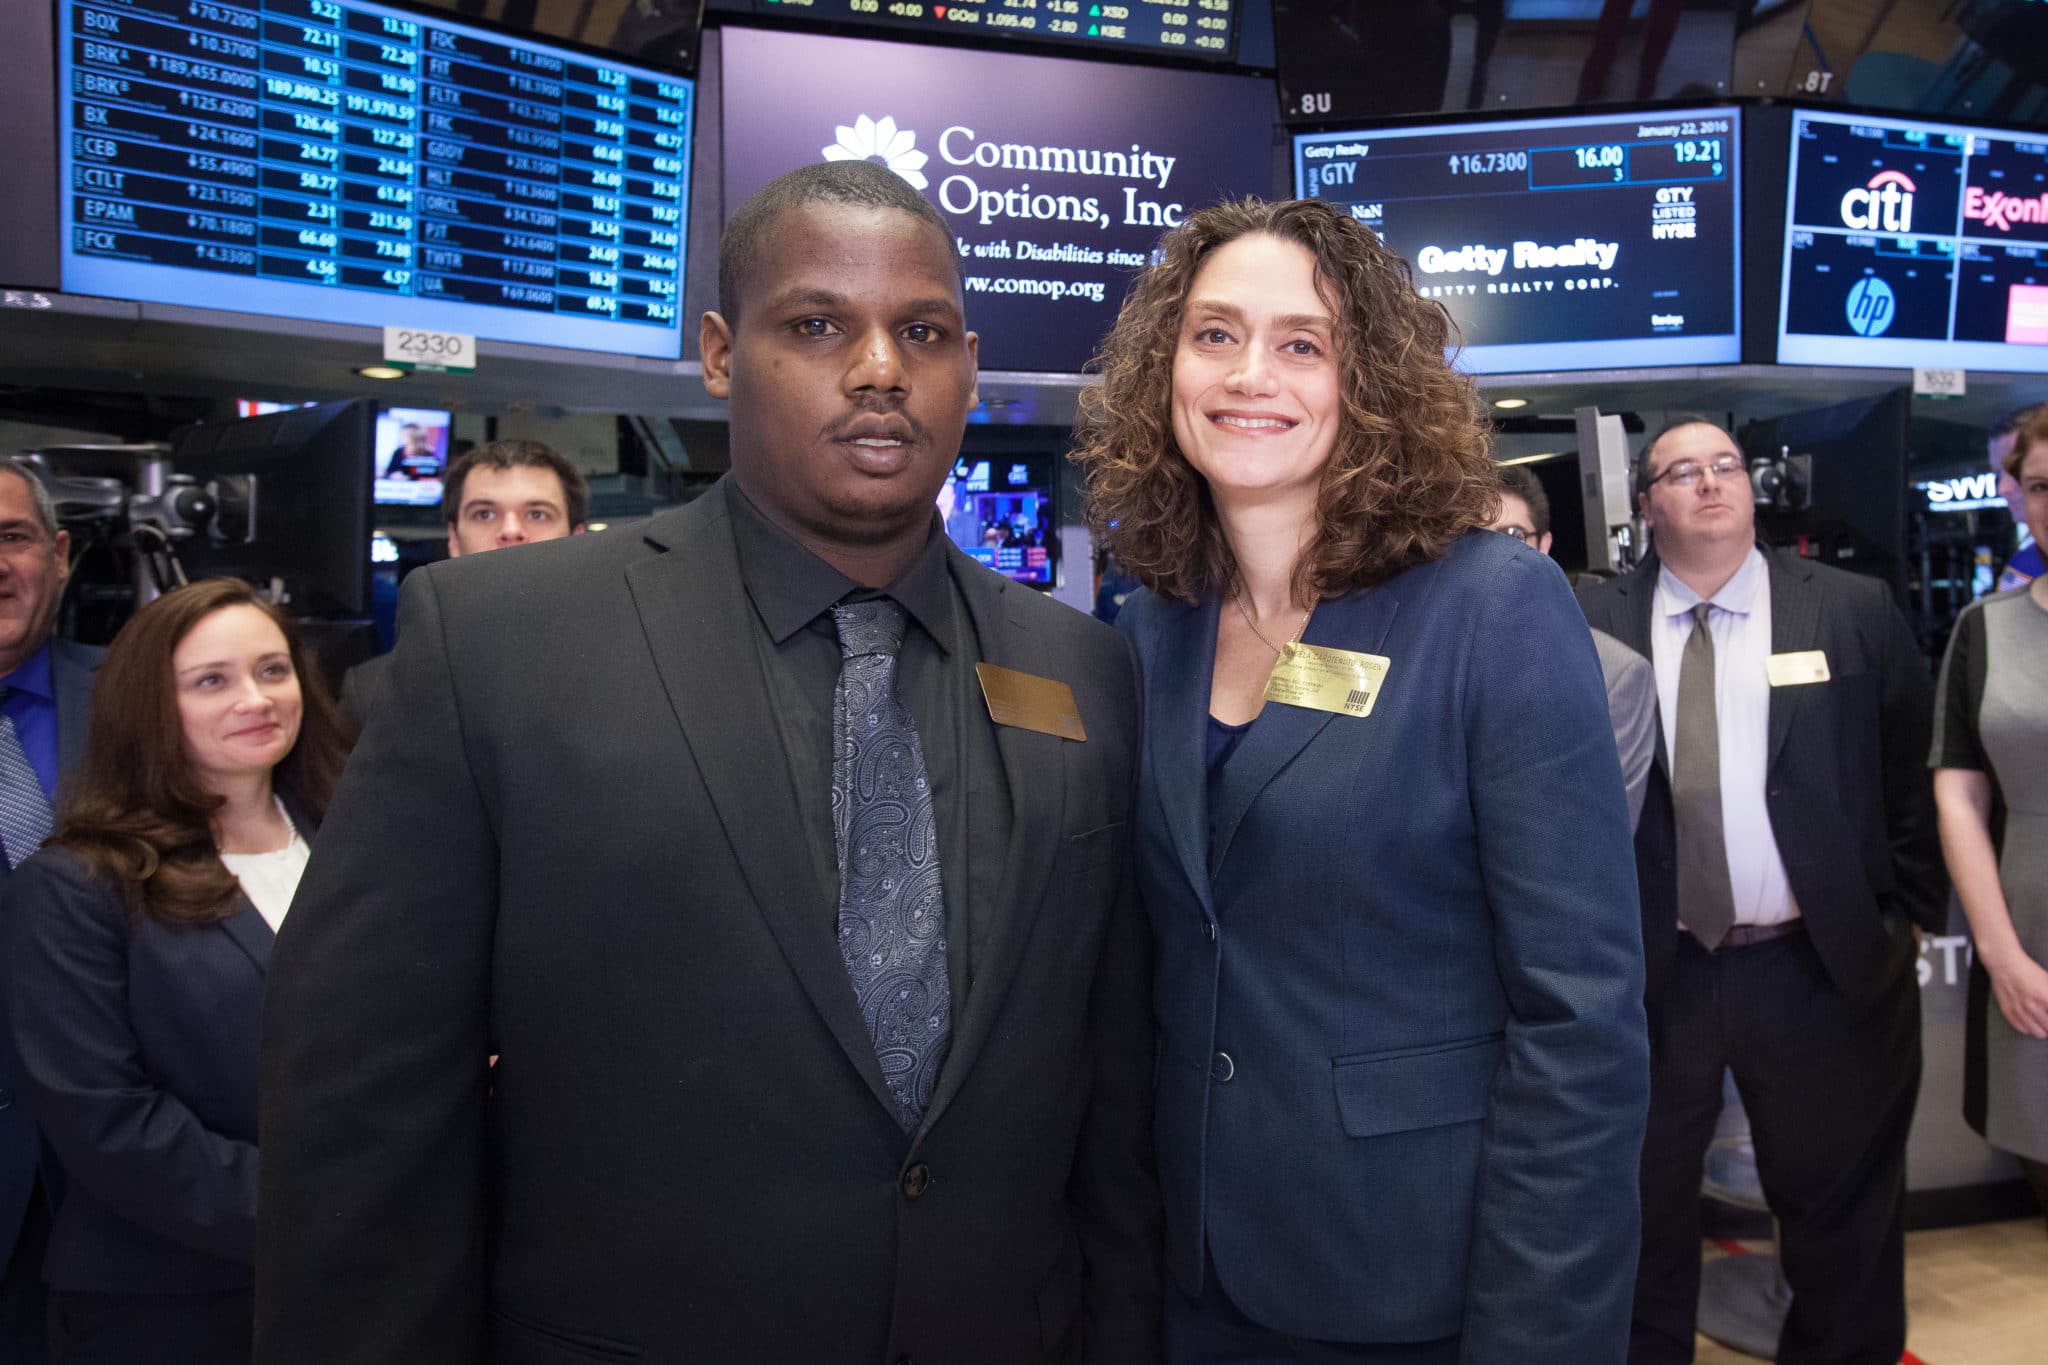 Robert Stack, President of Community Options, Inc., selected Roy King to ring the opening bell at the New York Stock Exchange, Friday January 22, 2016.